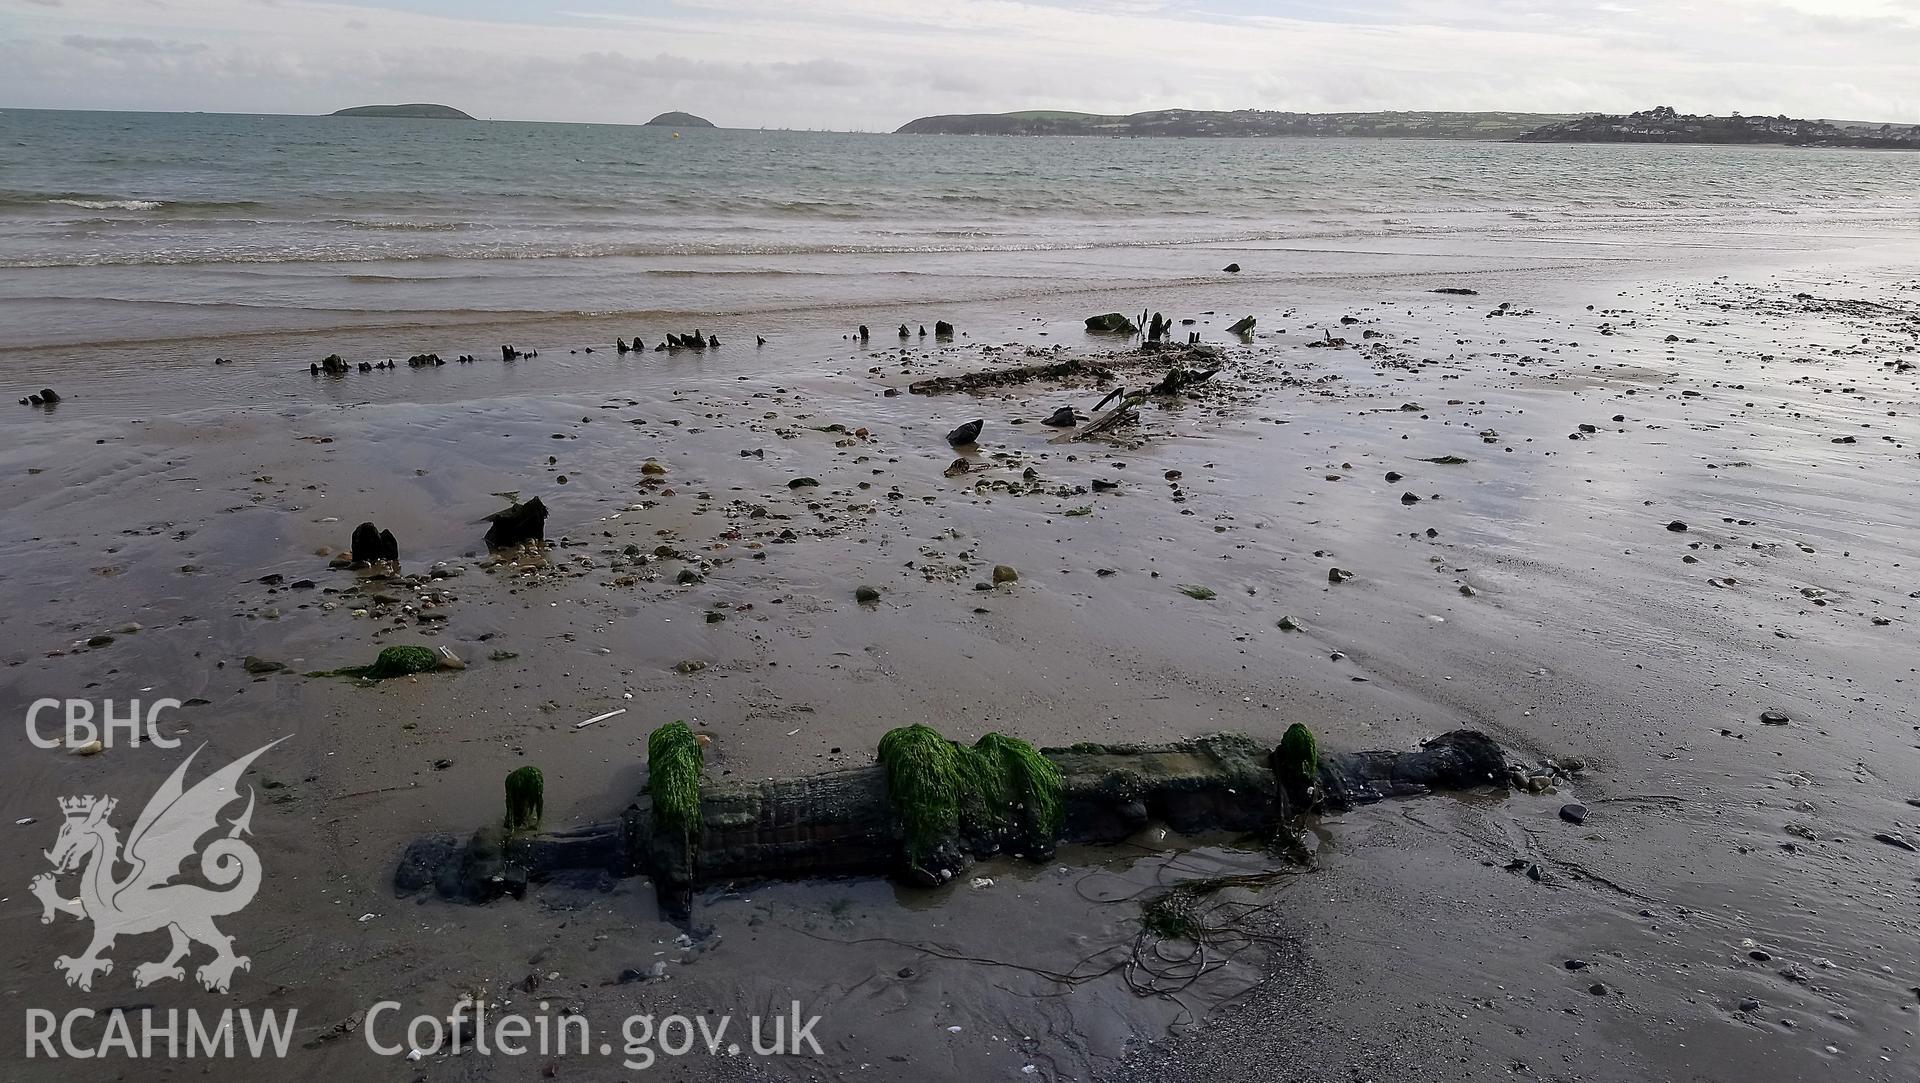 Photographic survey of newly-identified wreck on The Warren beach, Abersoch. Recorded with GNSS and photogrammetry for the CHERISH Project. ? Crown: CHERISH PROJECT 2018. Produced with EU funds through the Ireland Wales Co-operation Programme 2014-2020. All material made freely available through the Open Government Licence.